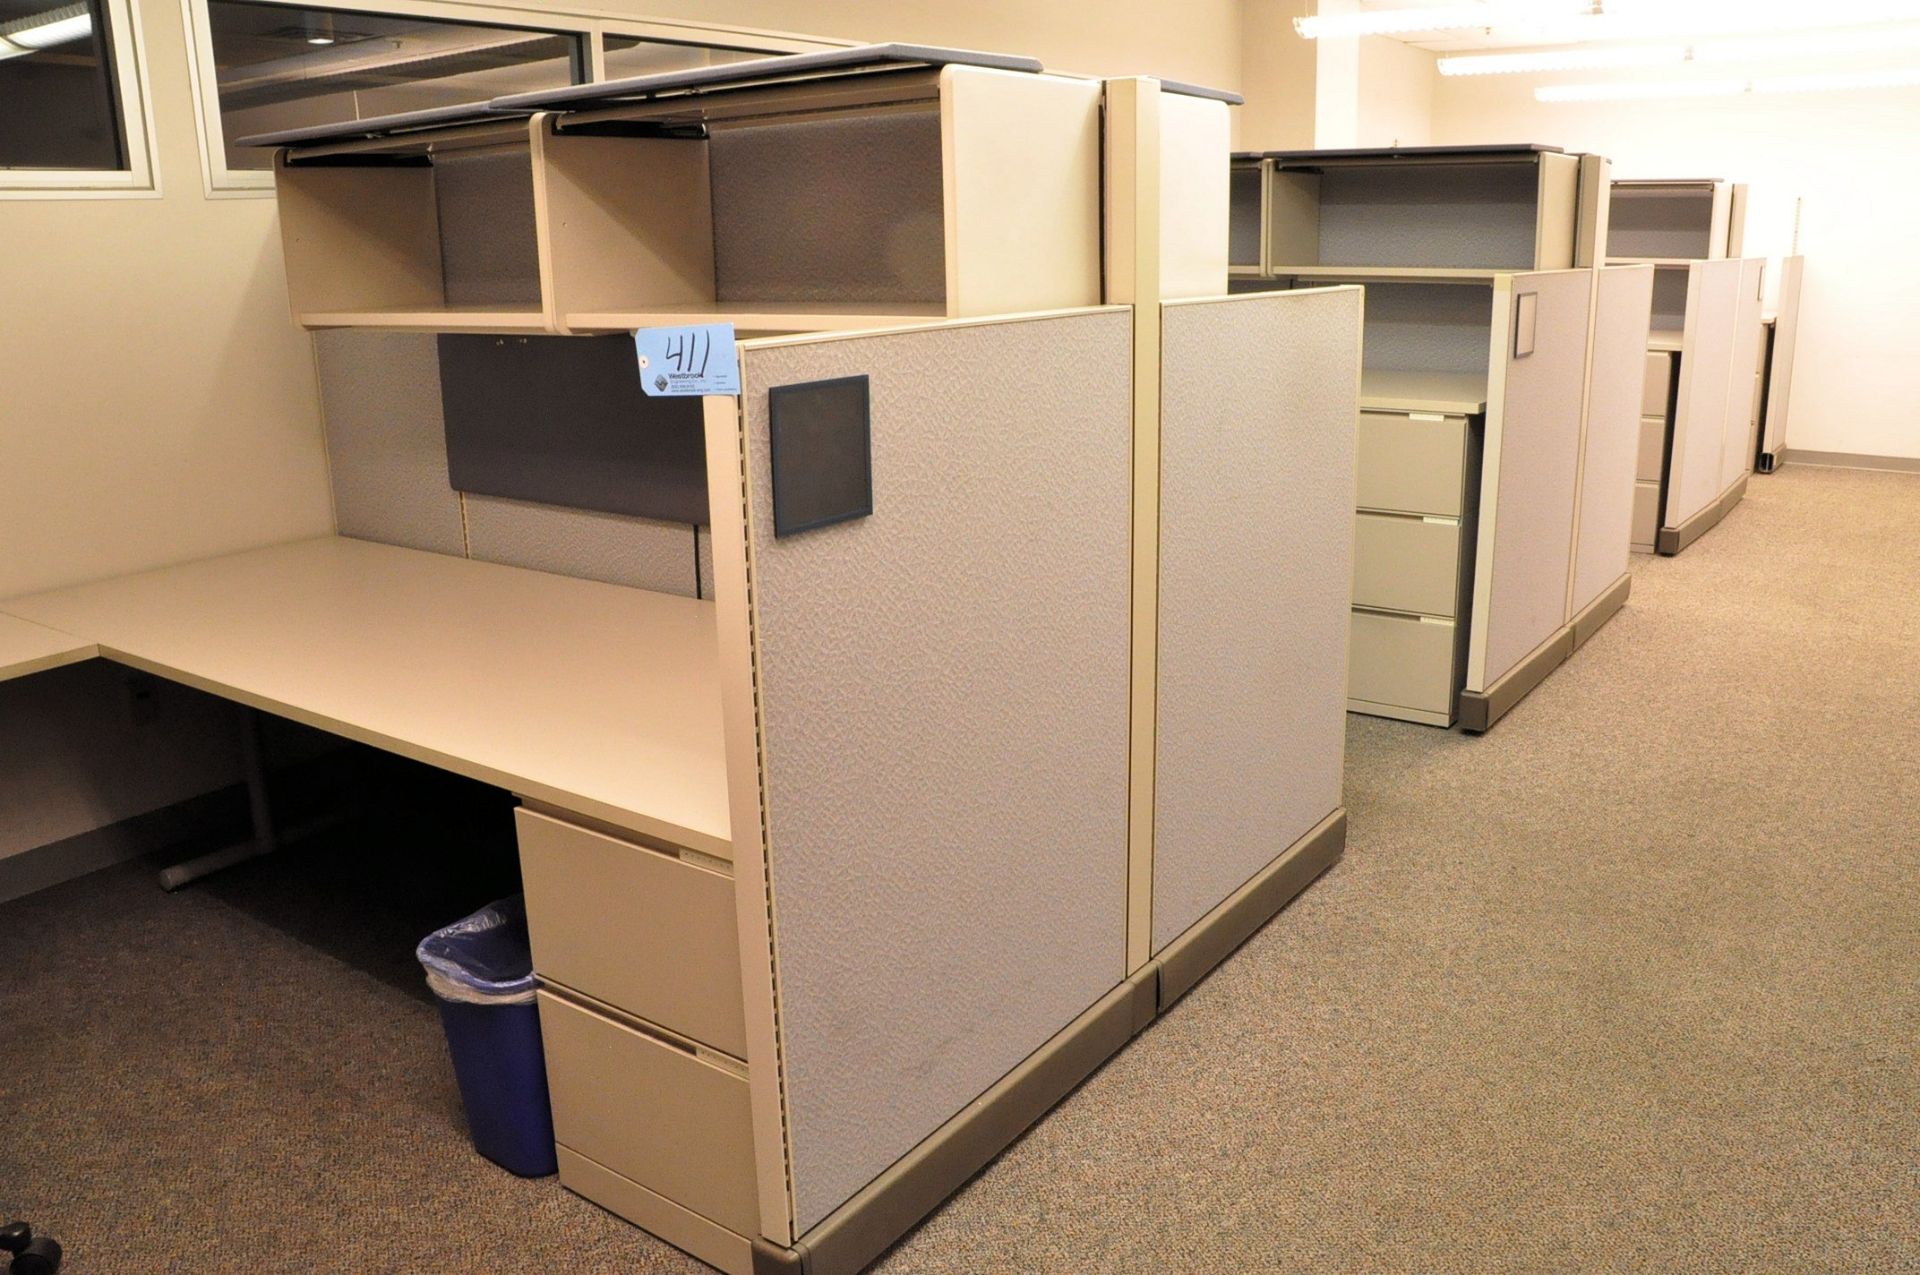 Lot-Cubicle Partition Work Systems in (1) Group in (1) Office, (No